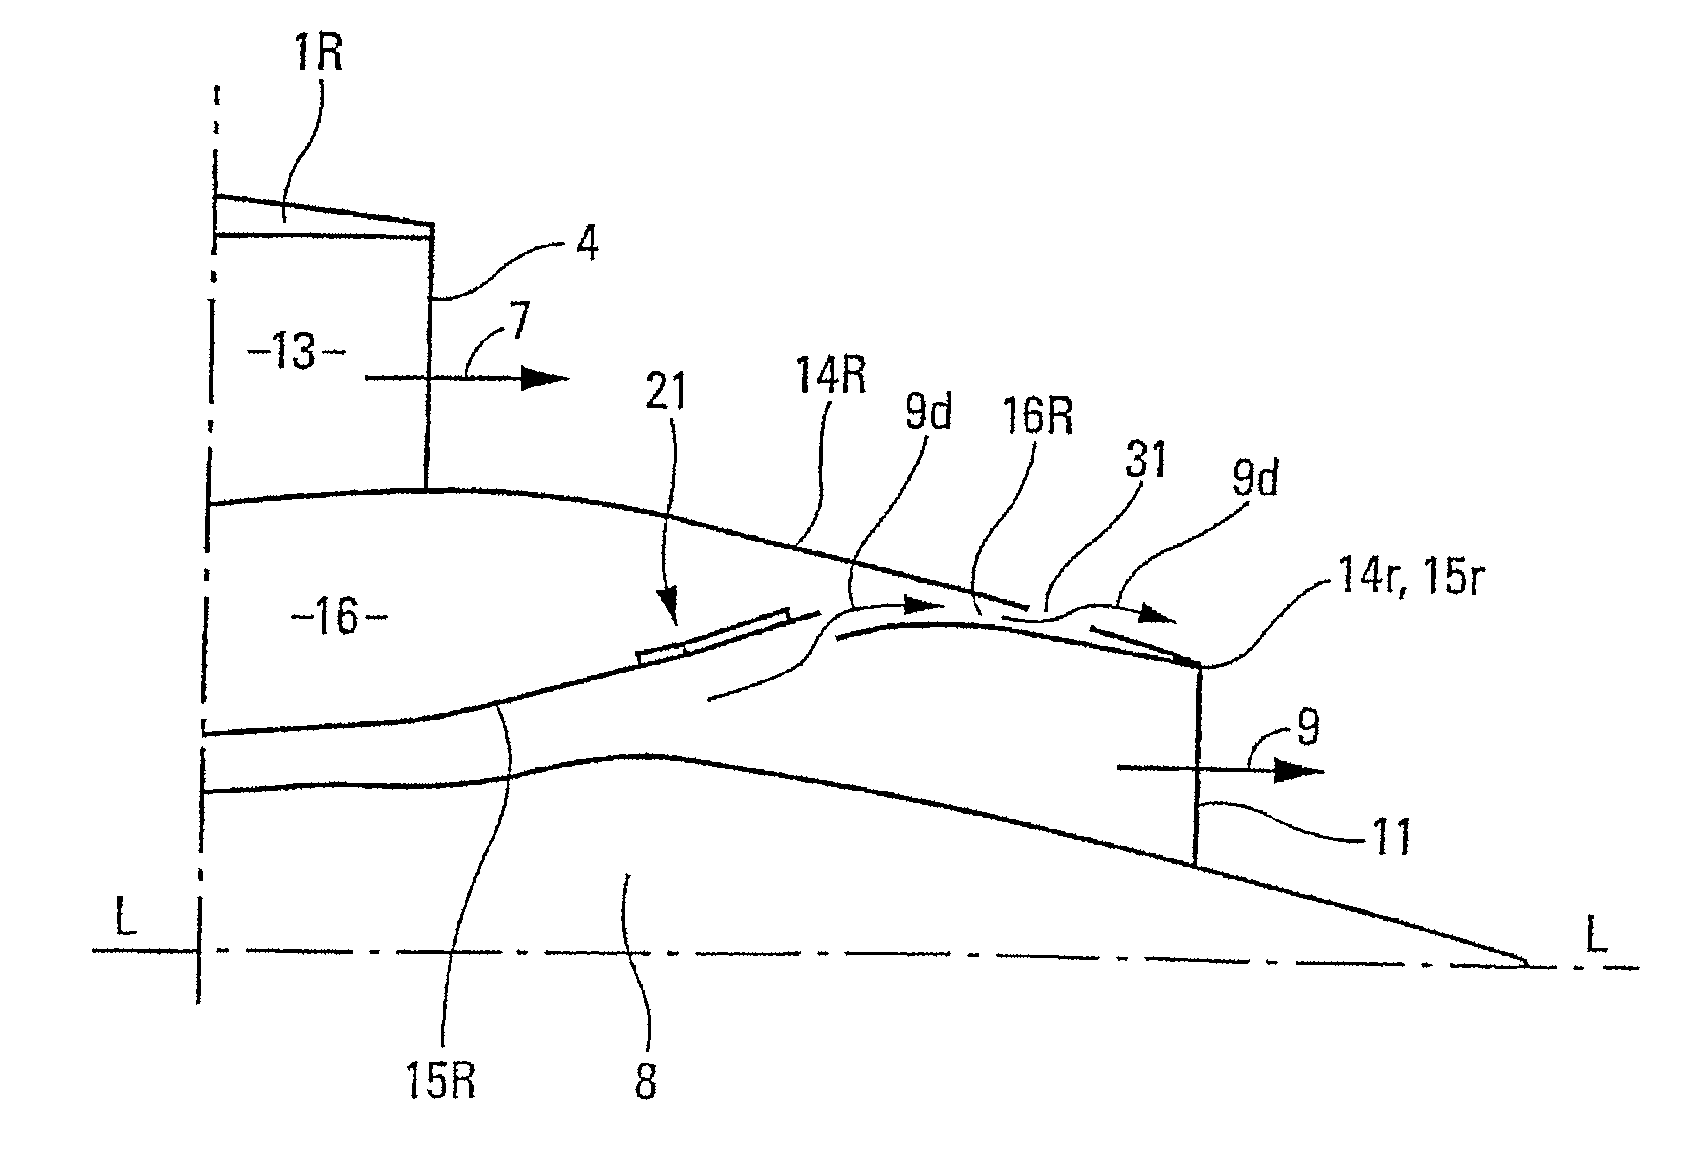 Turbojet engine with attenuated jet noise